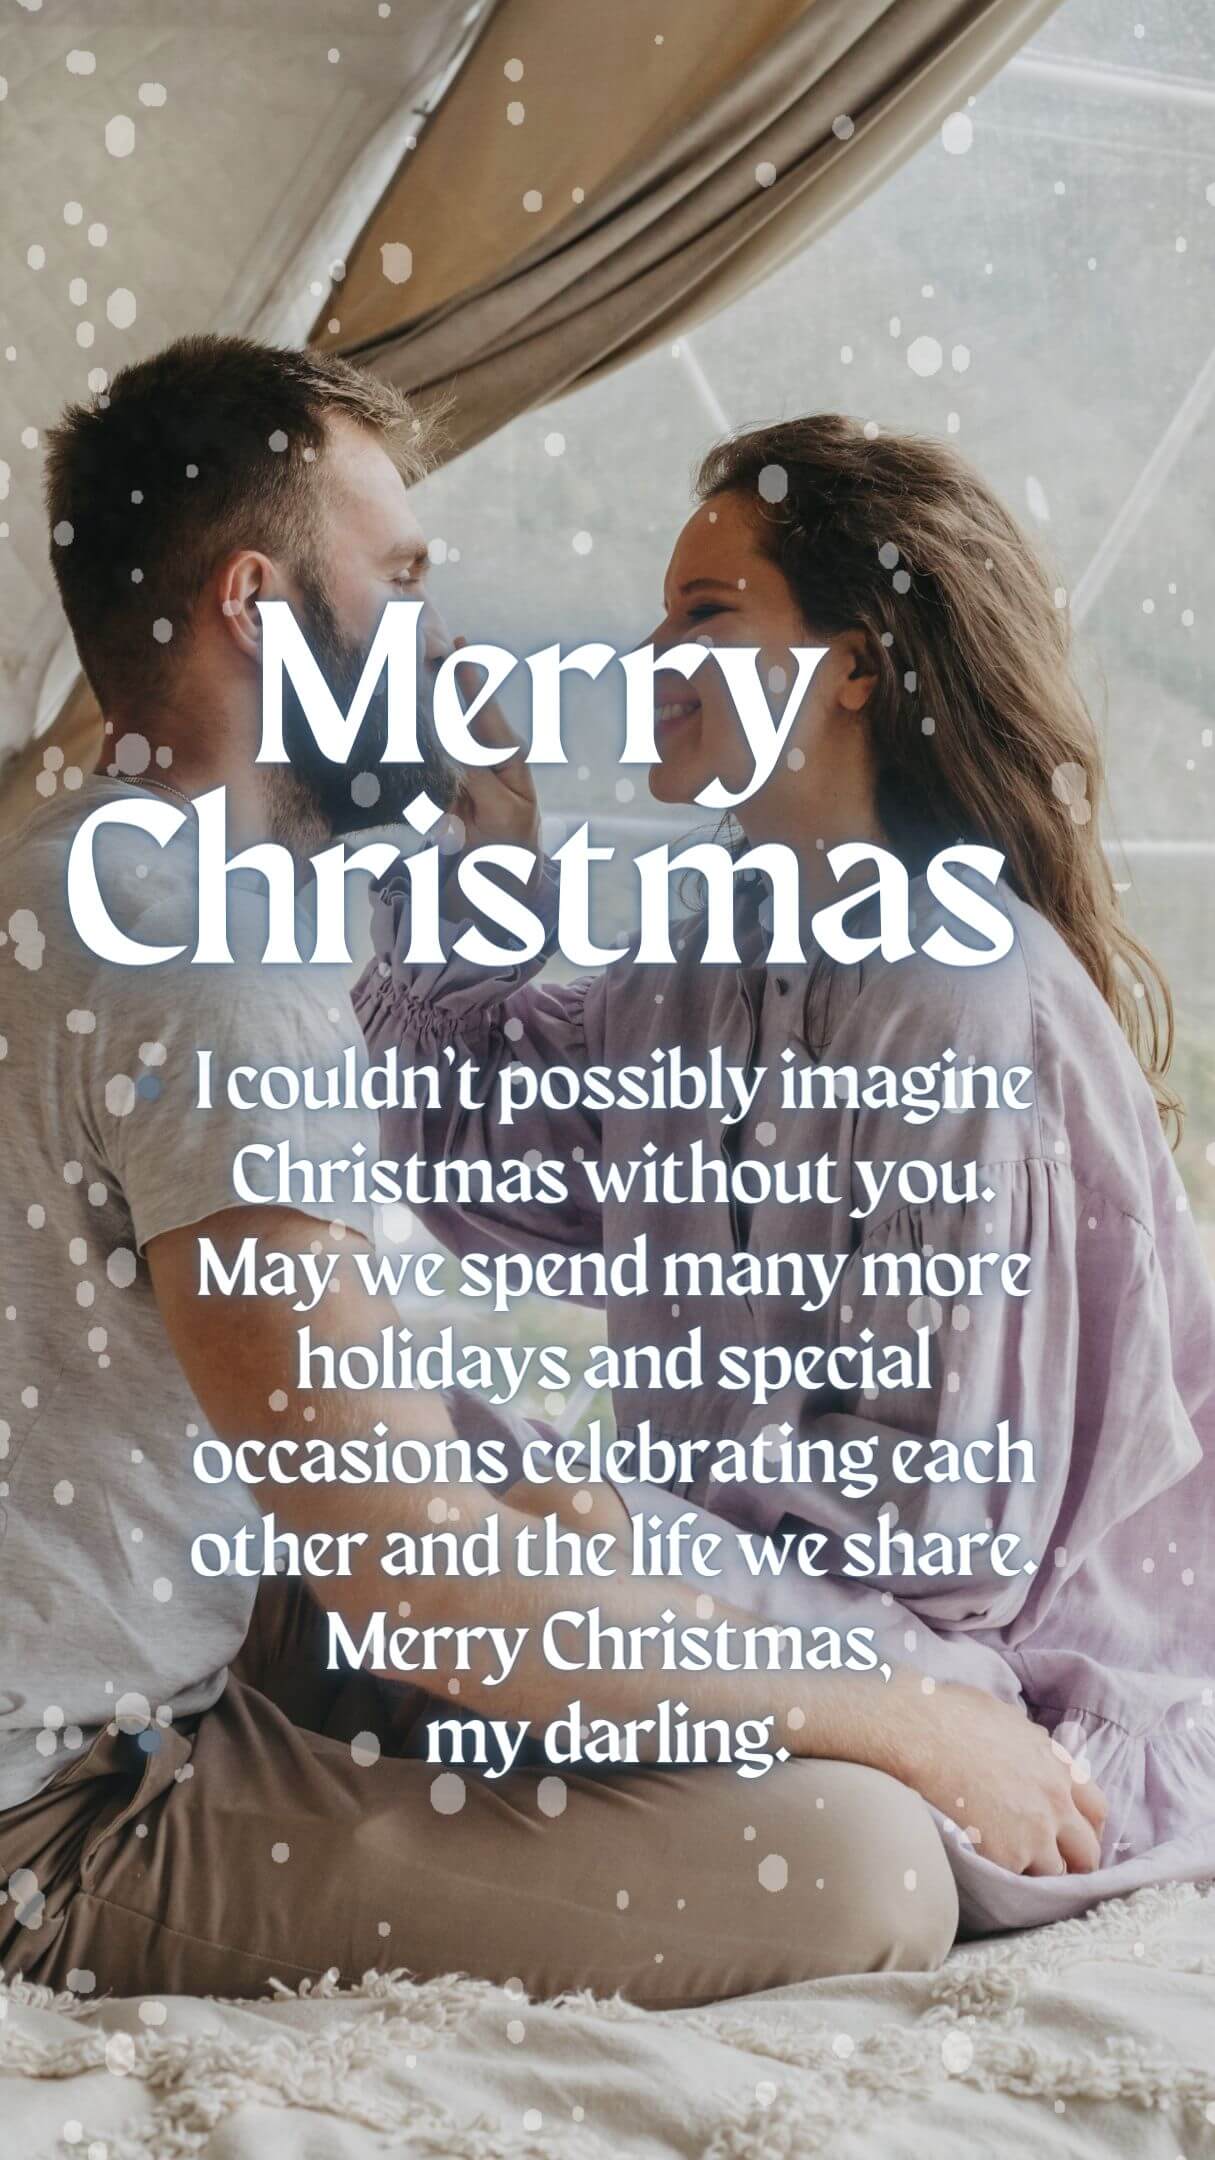 Merry Christmas Wishes For My Darling Husband